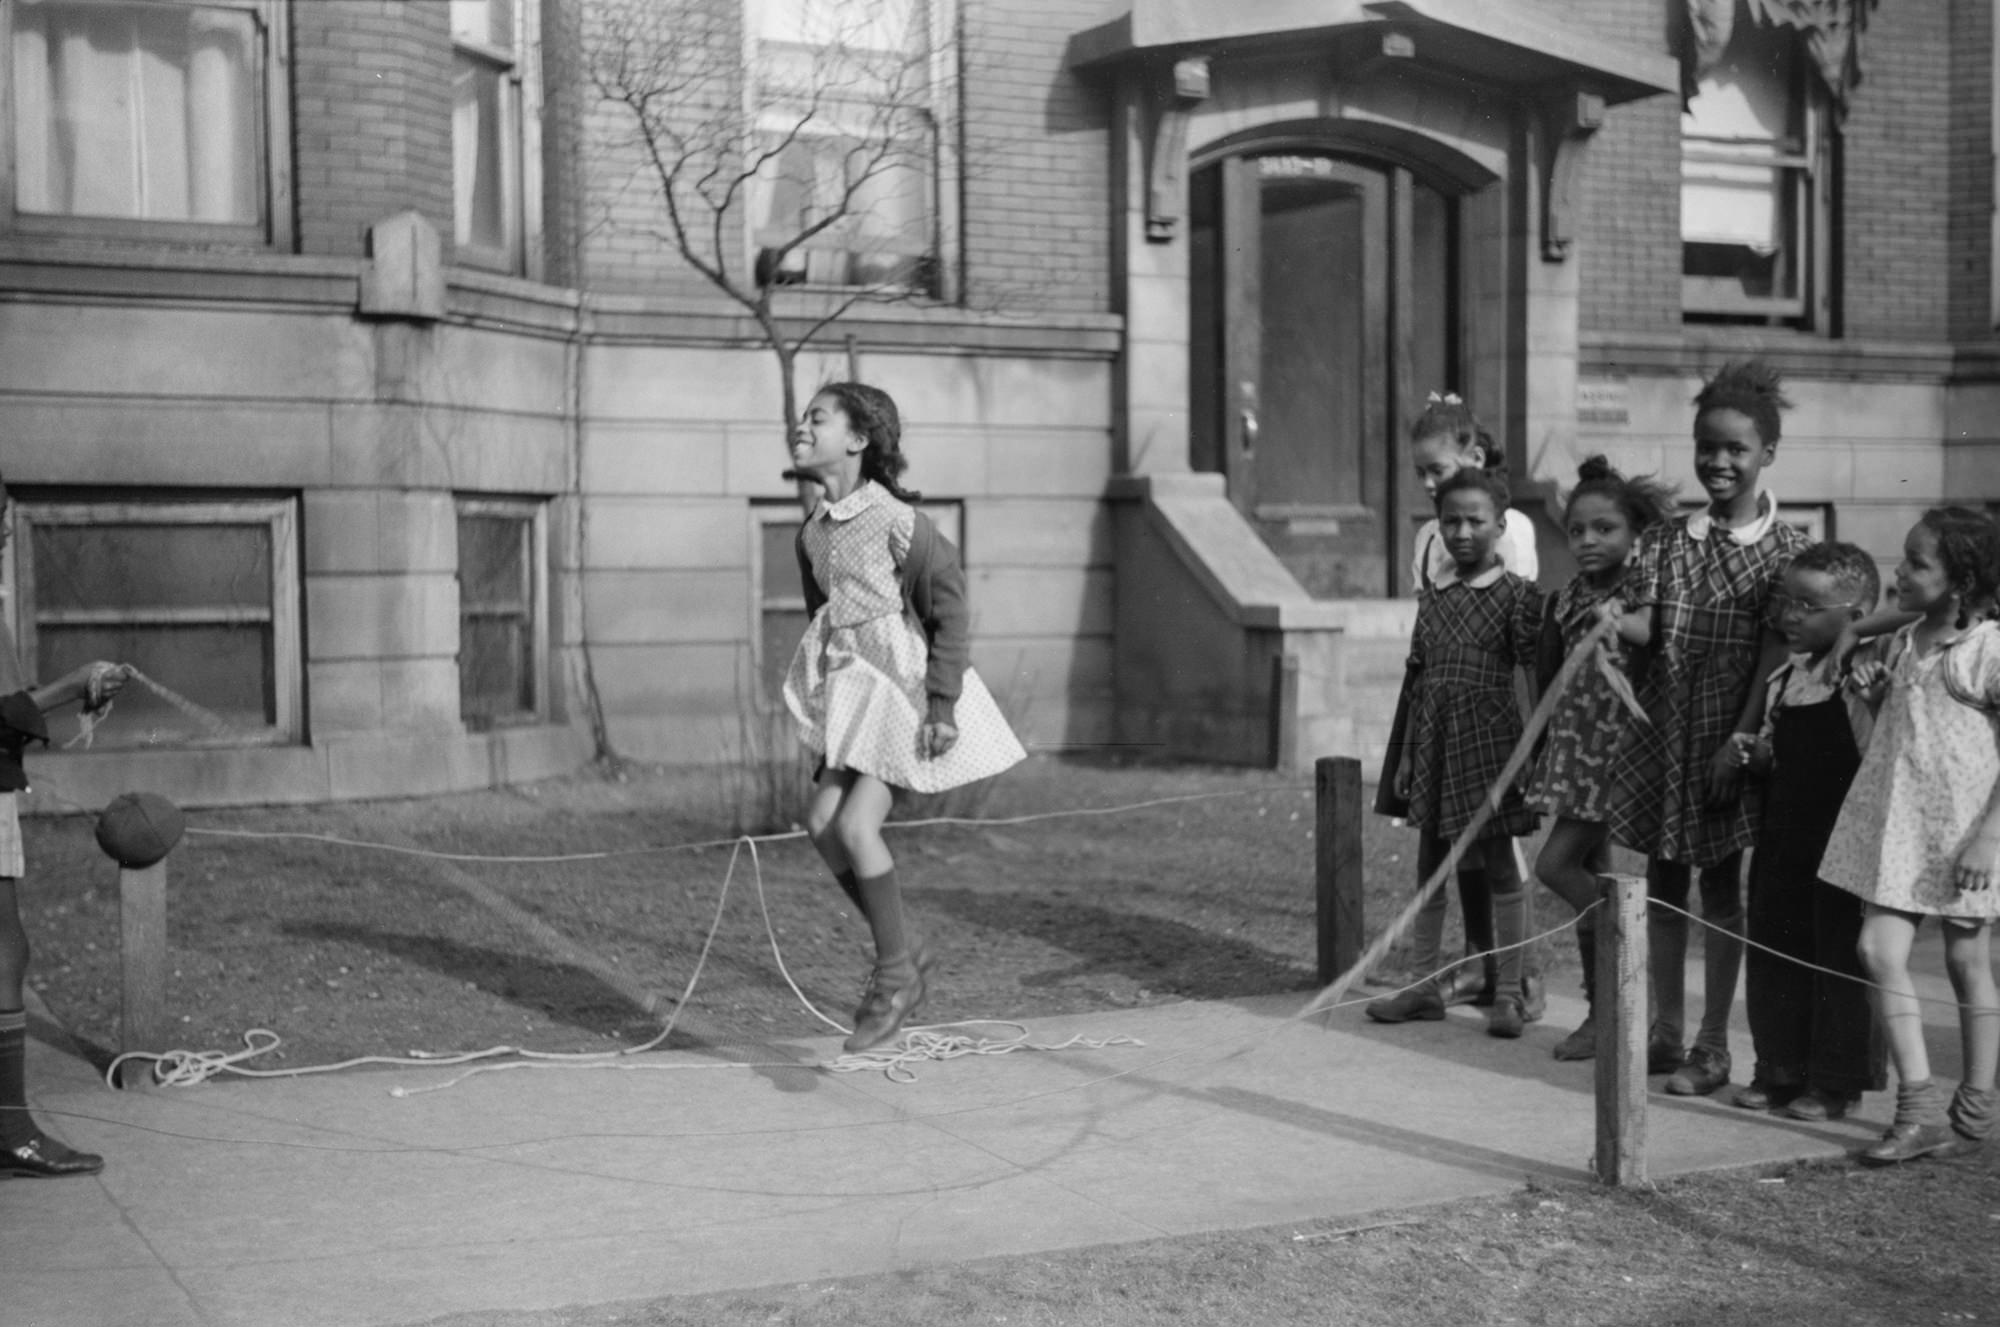 Old image of african american girl jumping rope